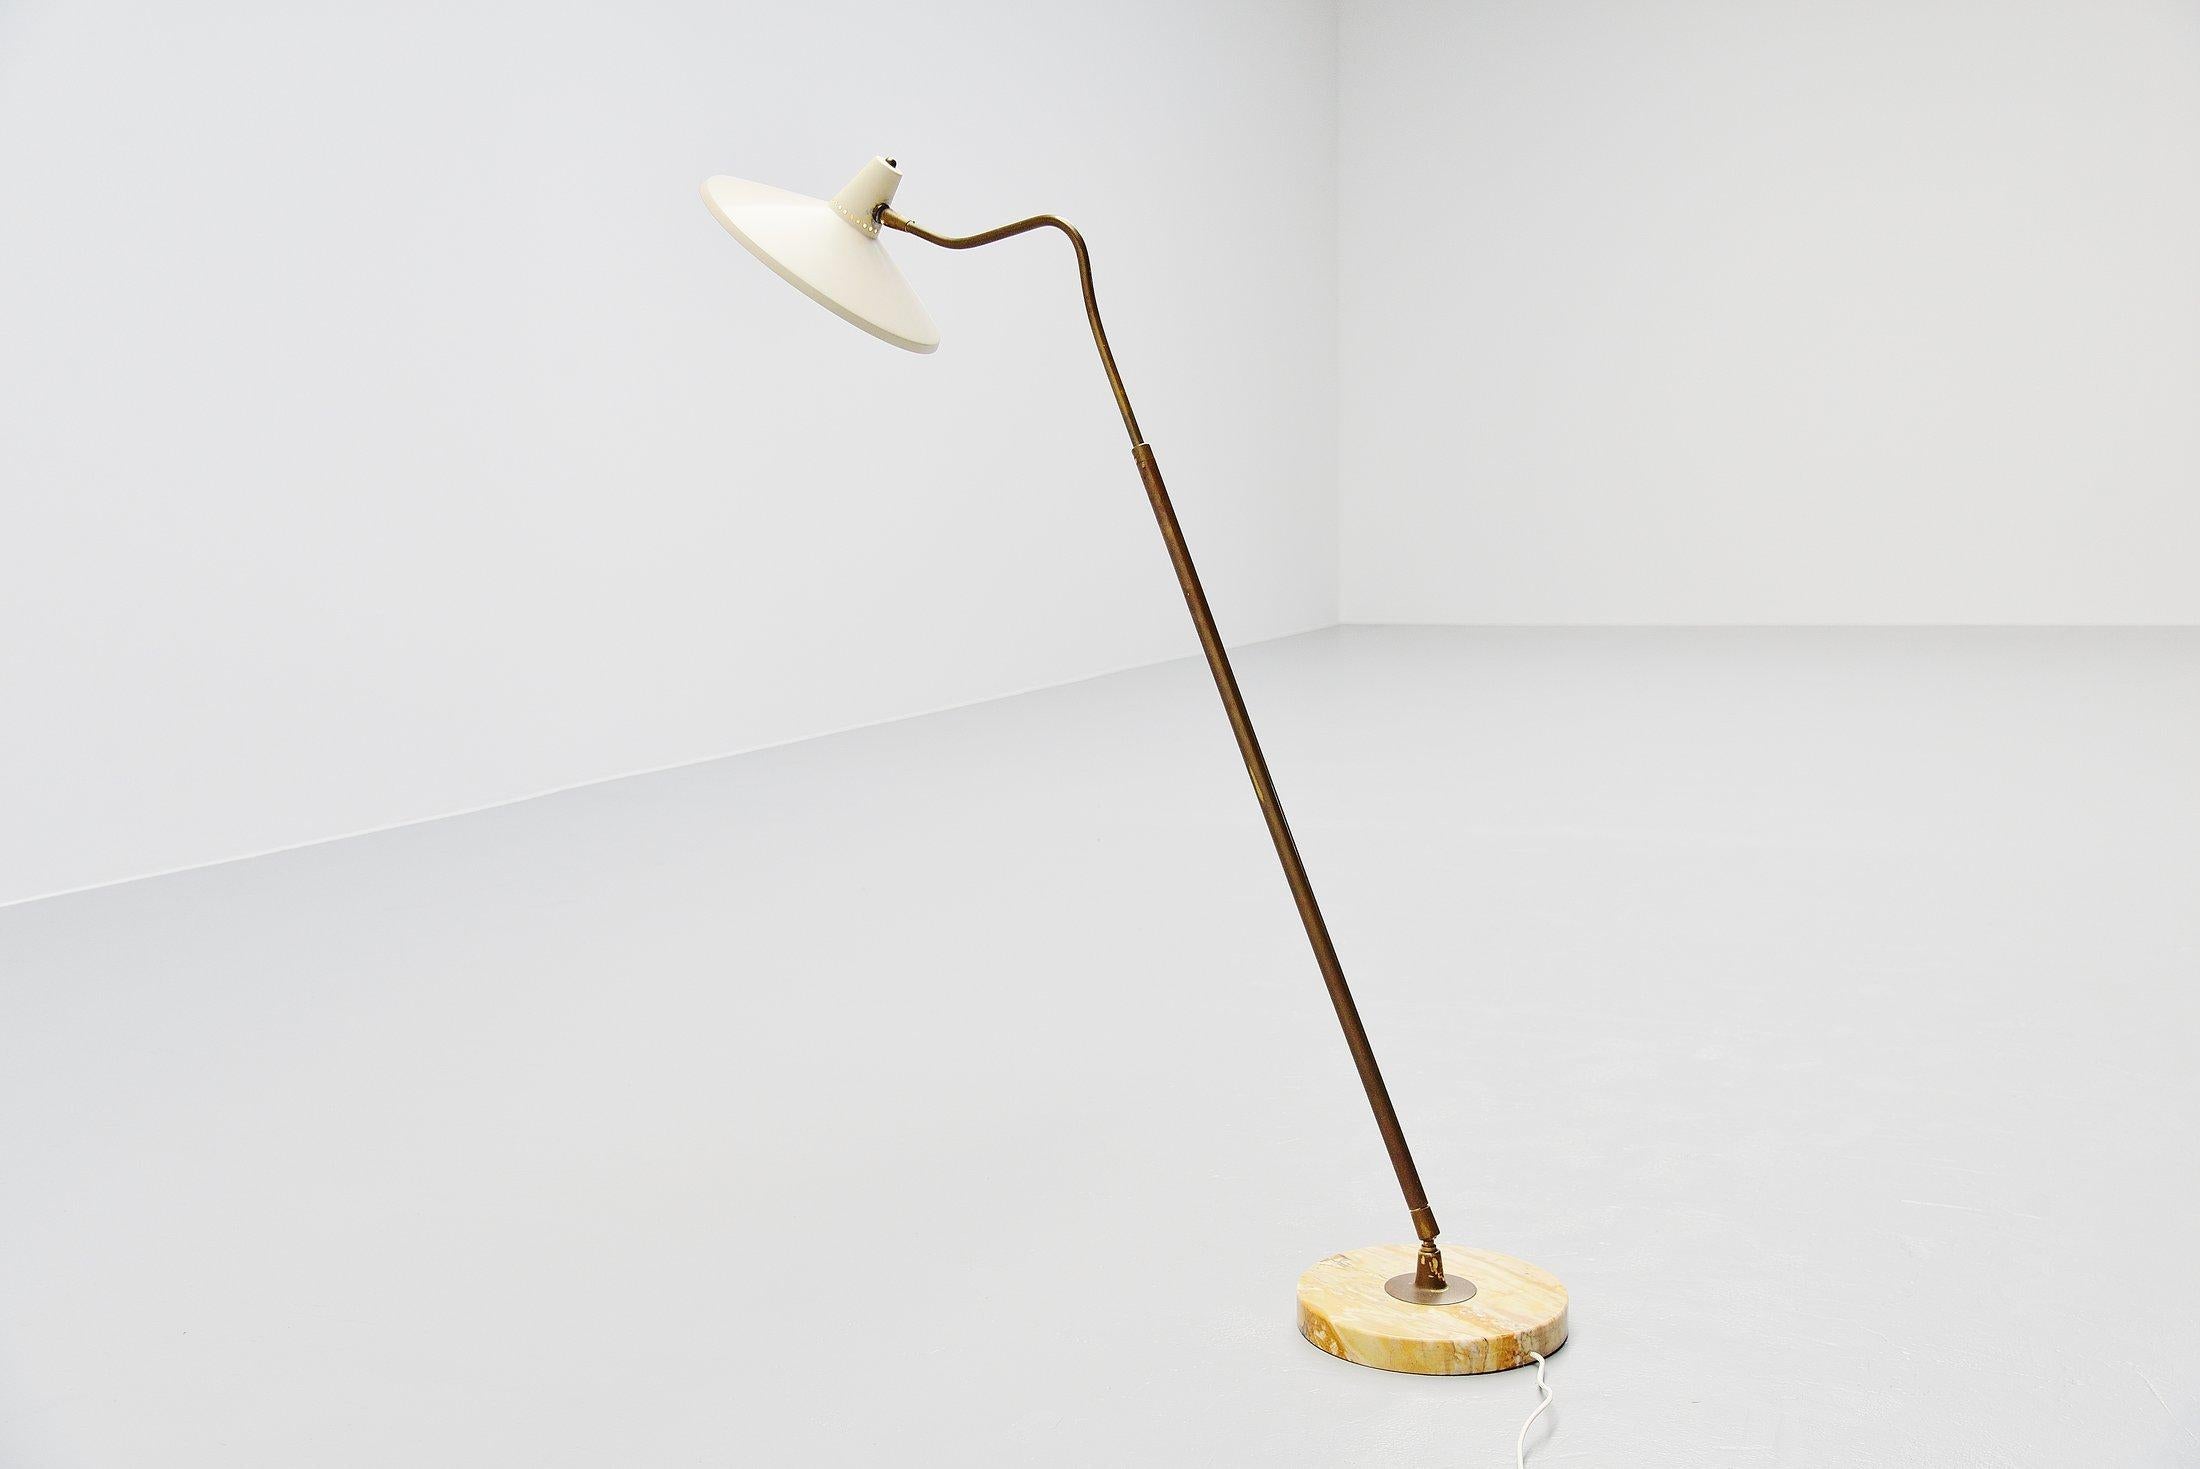 Very nice and sophisticated floor lamp model 301C designed by Giuseppe Ostuni and manufactured by Oluce, Italy, 1950. This lamp has a stem that is adjustable in angle and extractable for multiple uses. Very nice solid brass stem with and of white